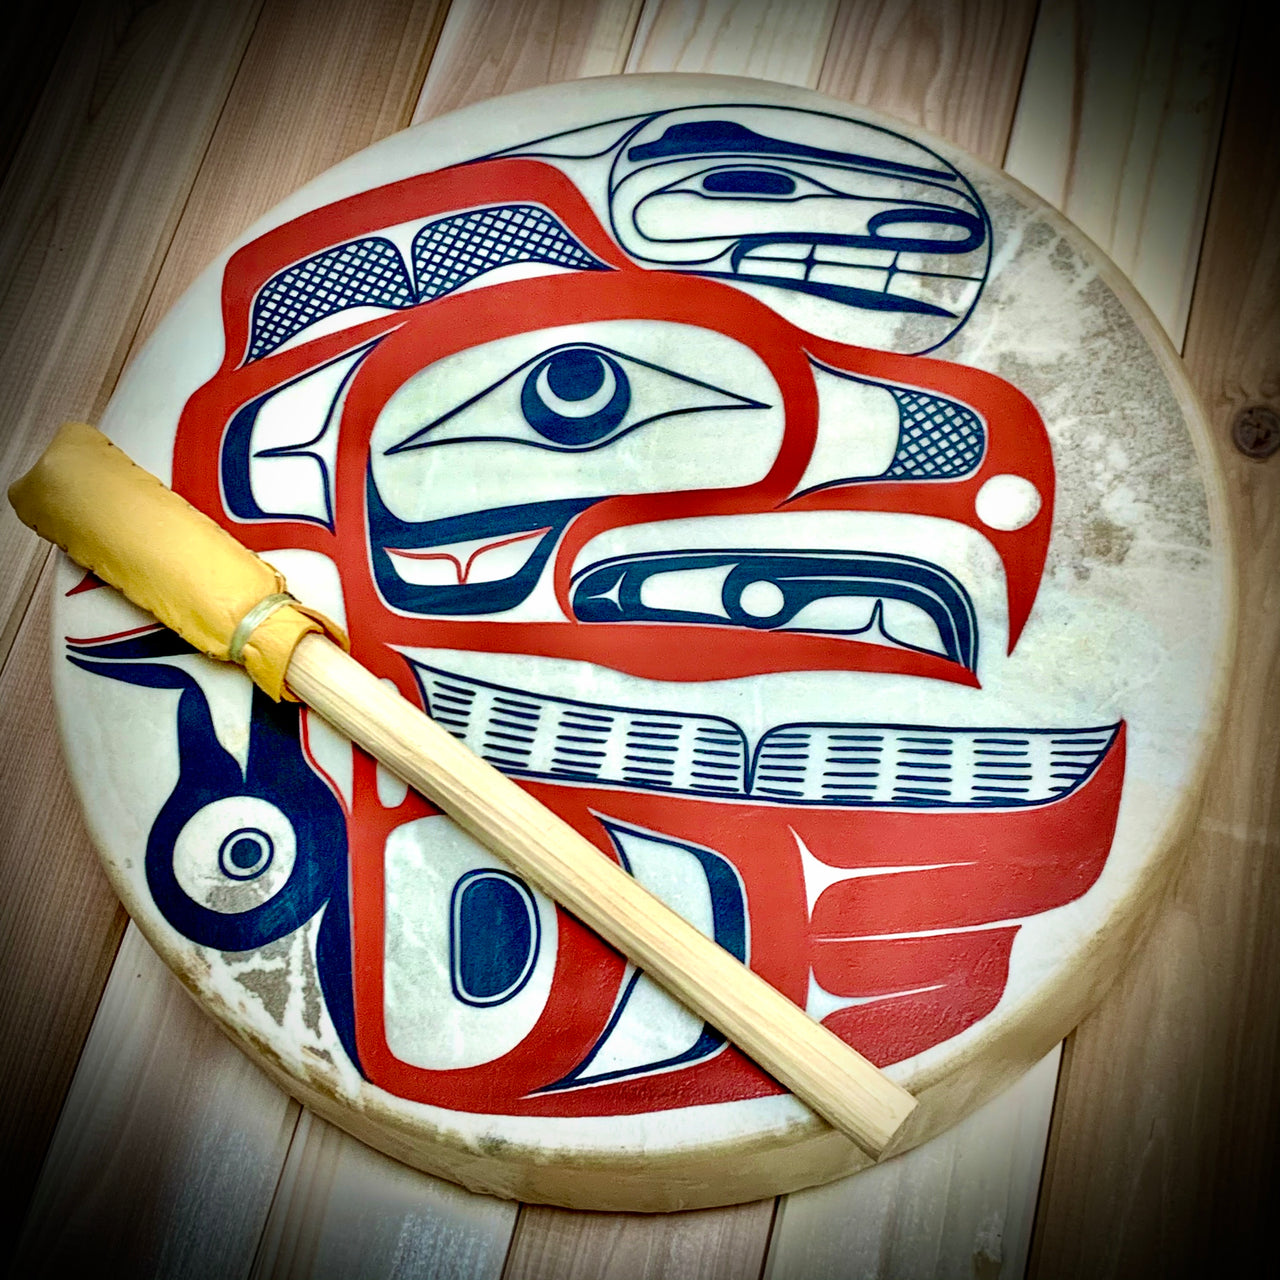 Eagle 14" Drum by David Boxley